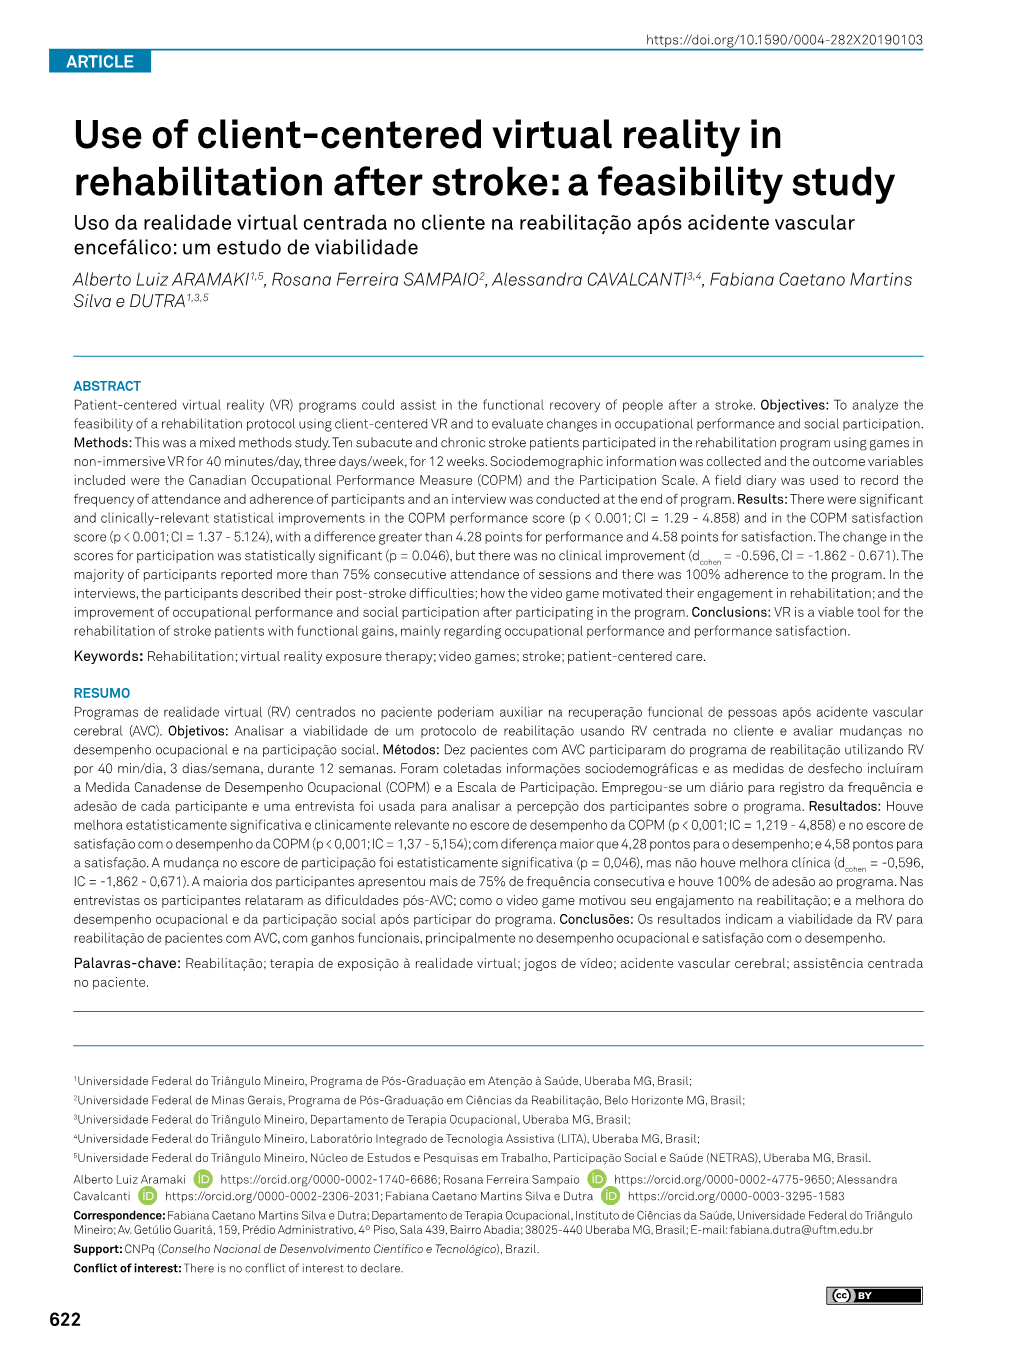 Use of Client-Centered Virtual Reality in Rehabilitation After Stroke